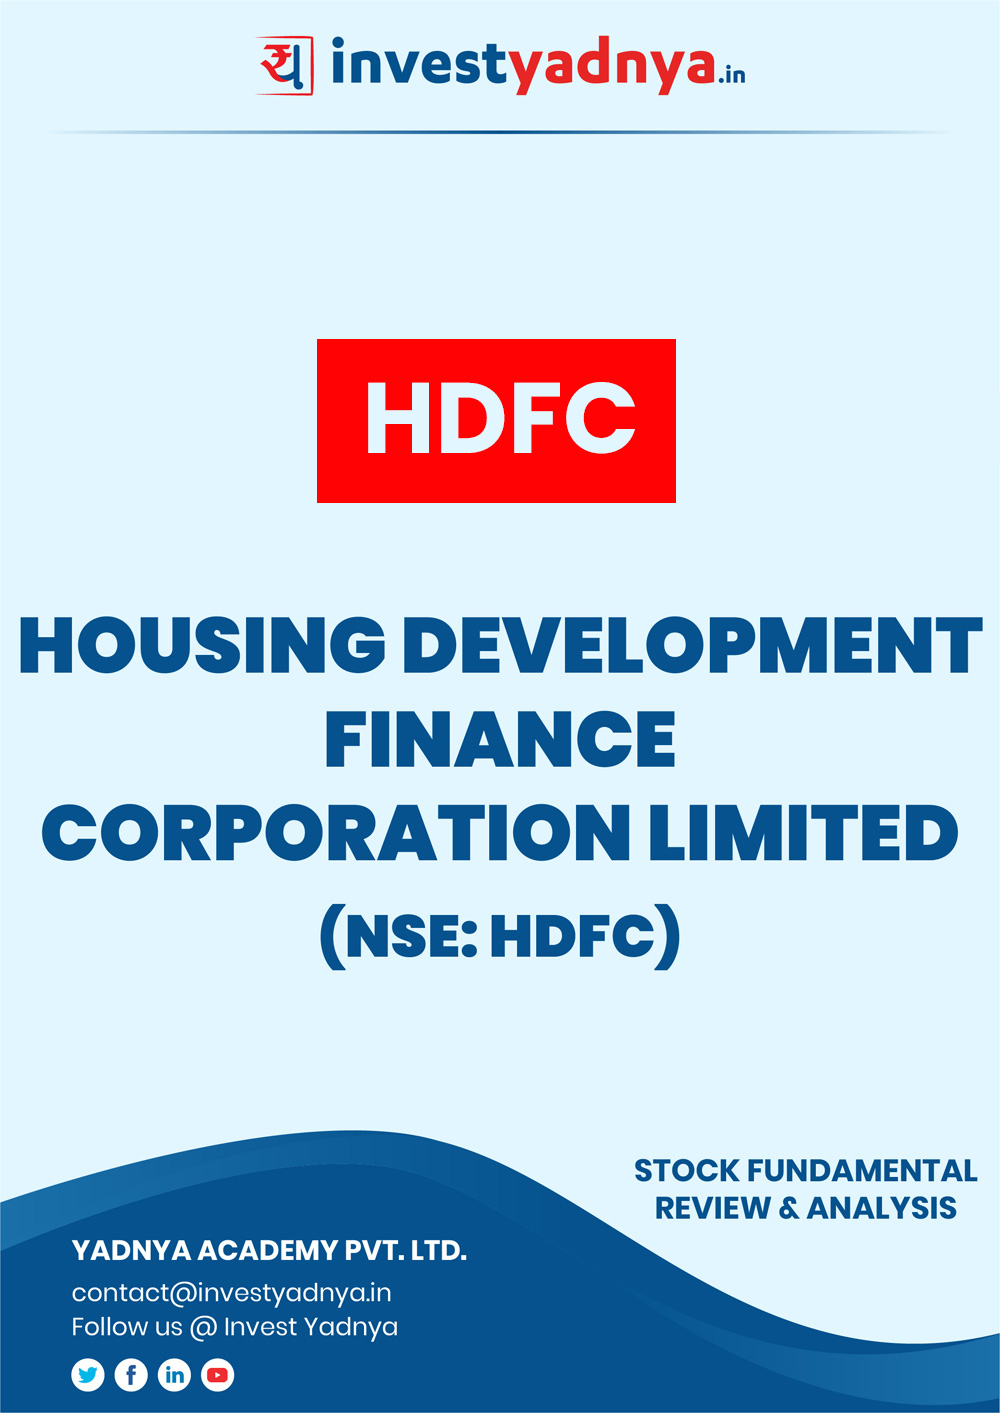 This e-book contains in-depth fundamental analysis of HDFC considering both Financial and Equity Research Parameters. It reviews the company, industry competitors, shareholding pattern, financials, and annual performance. ✔ Detailed Research ✔ Quality Reports